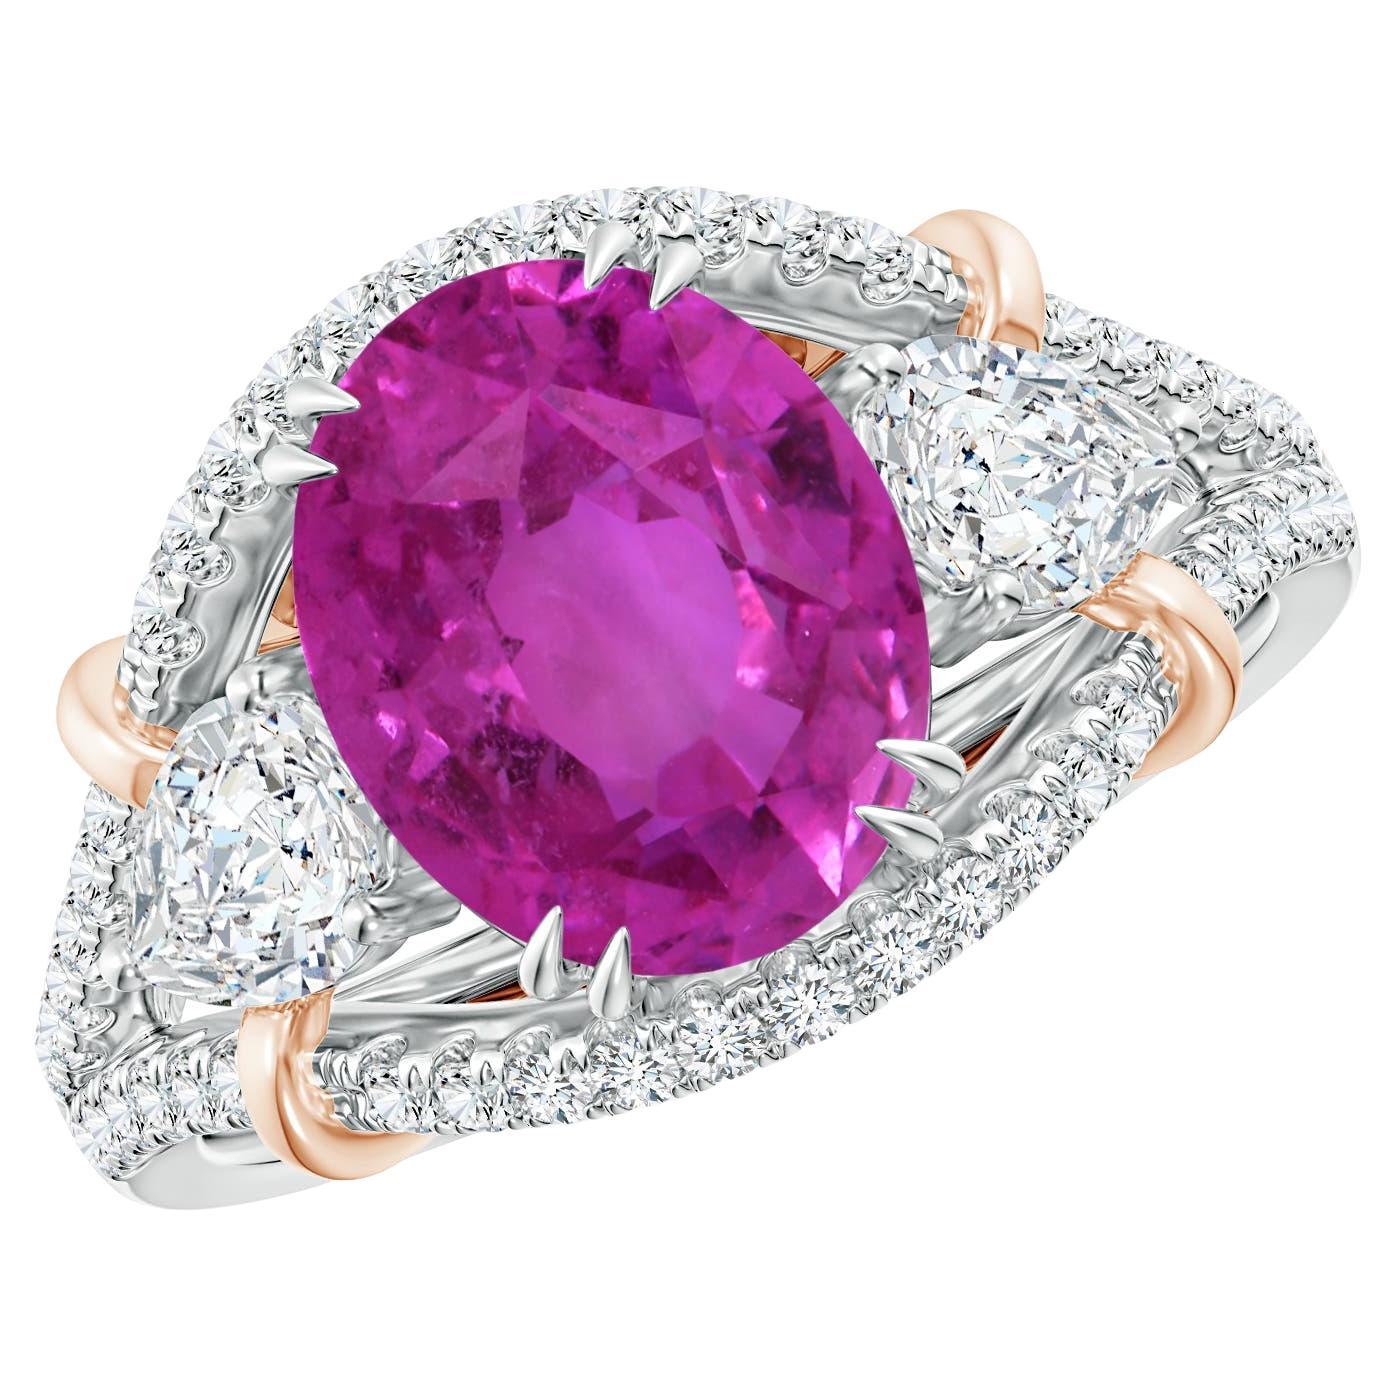 For Sale:  Angara Gia Certified Natural Pink Sapphire Ring in Rose Gold with Diamonds